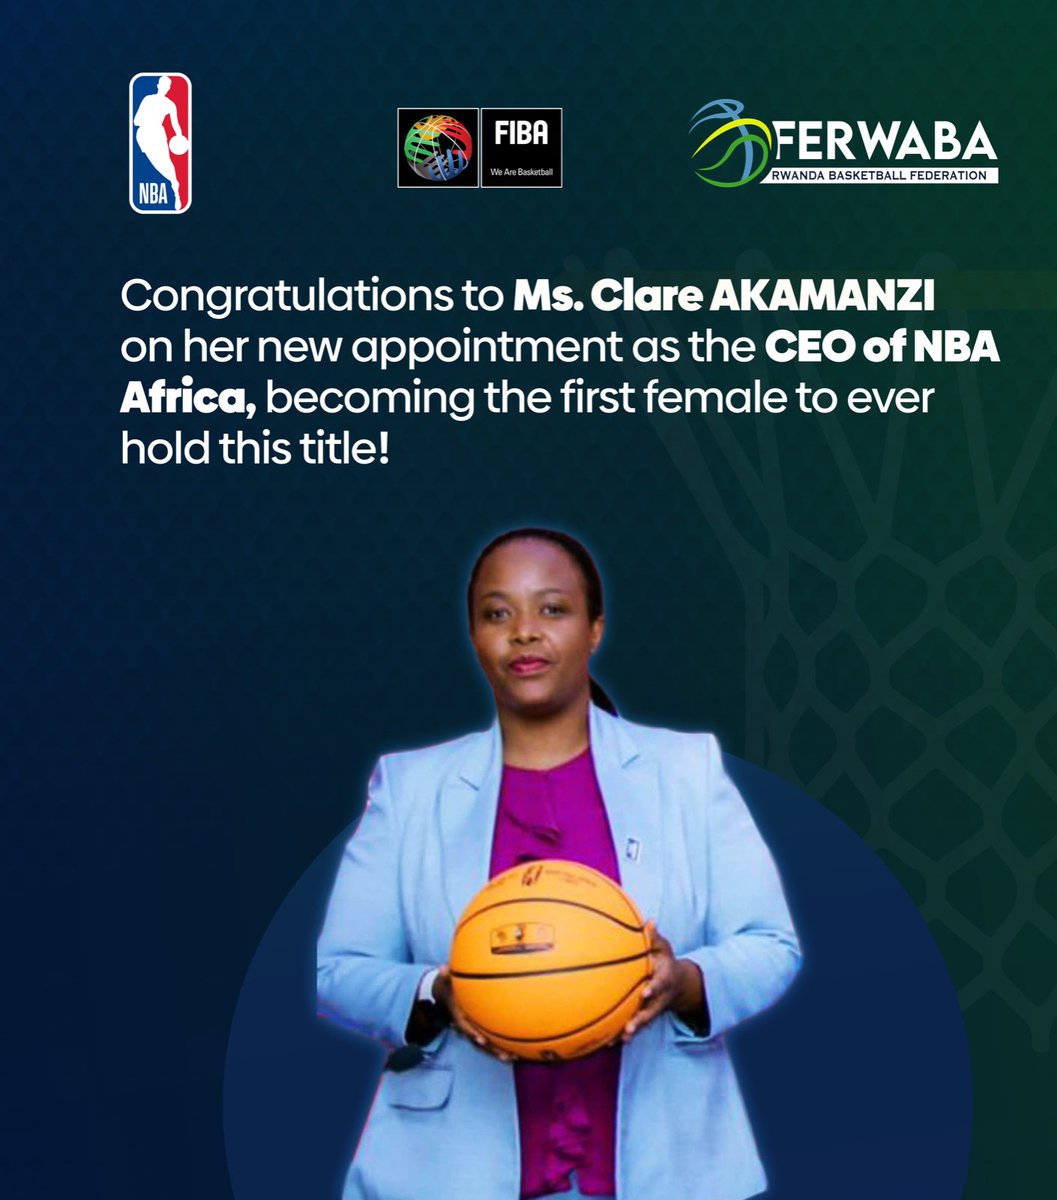 Warm congratulations to @cakamanzi on her new appointment as the CEO of NBA Africa, making her the first female to hold this title! With your leadership, the future of African basketball is bright 🏀🌍